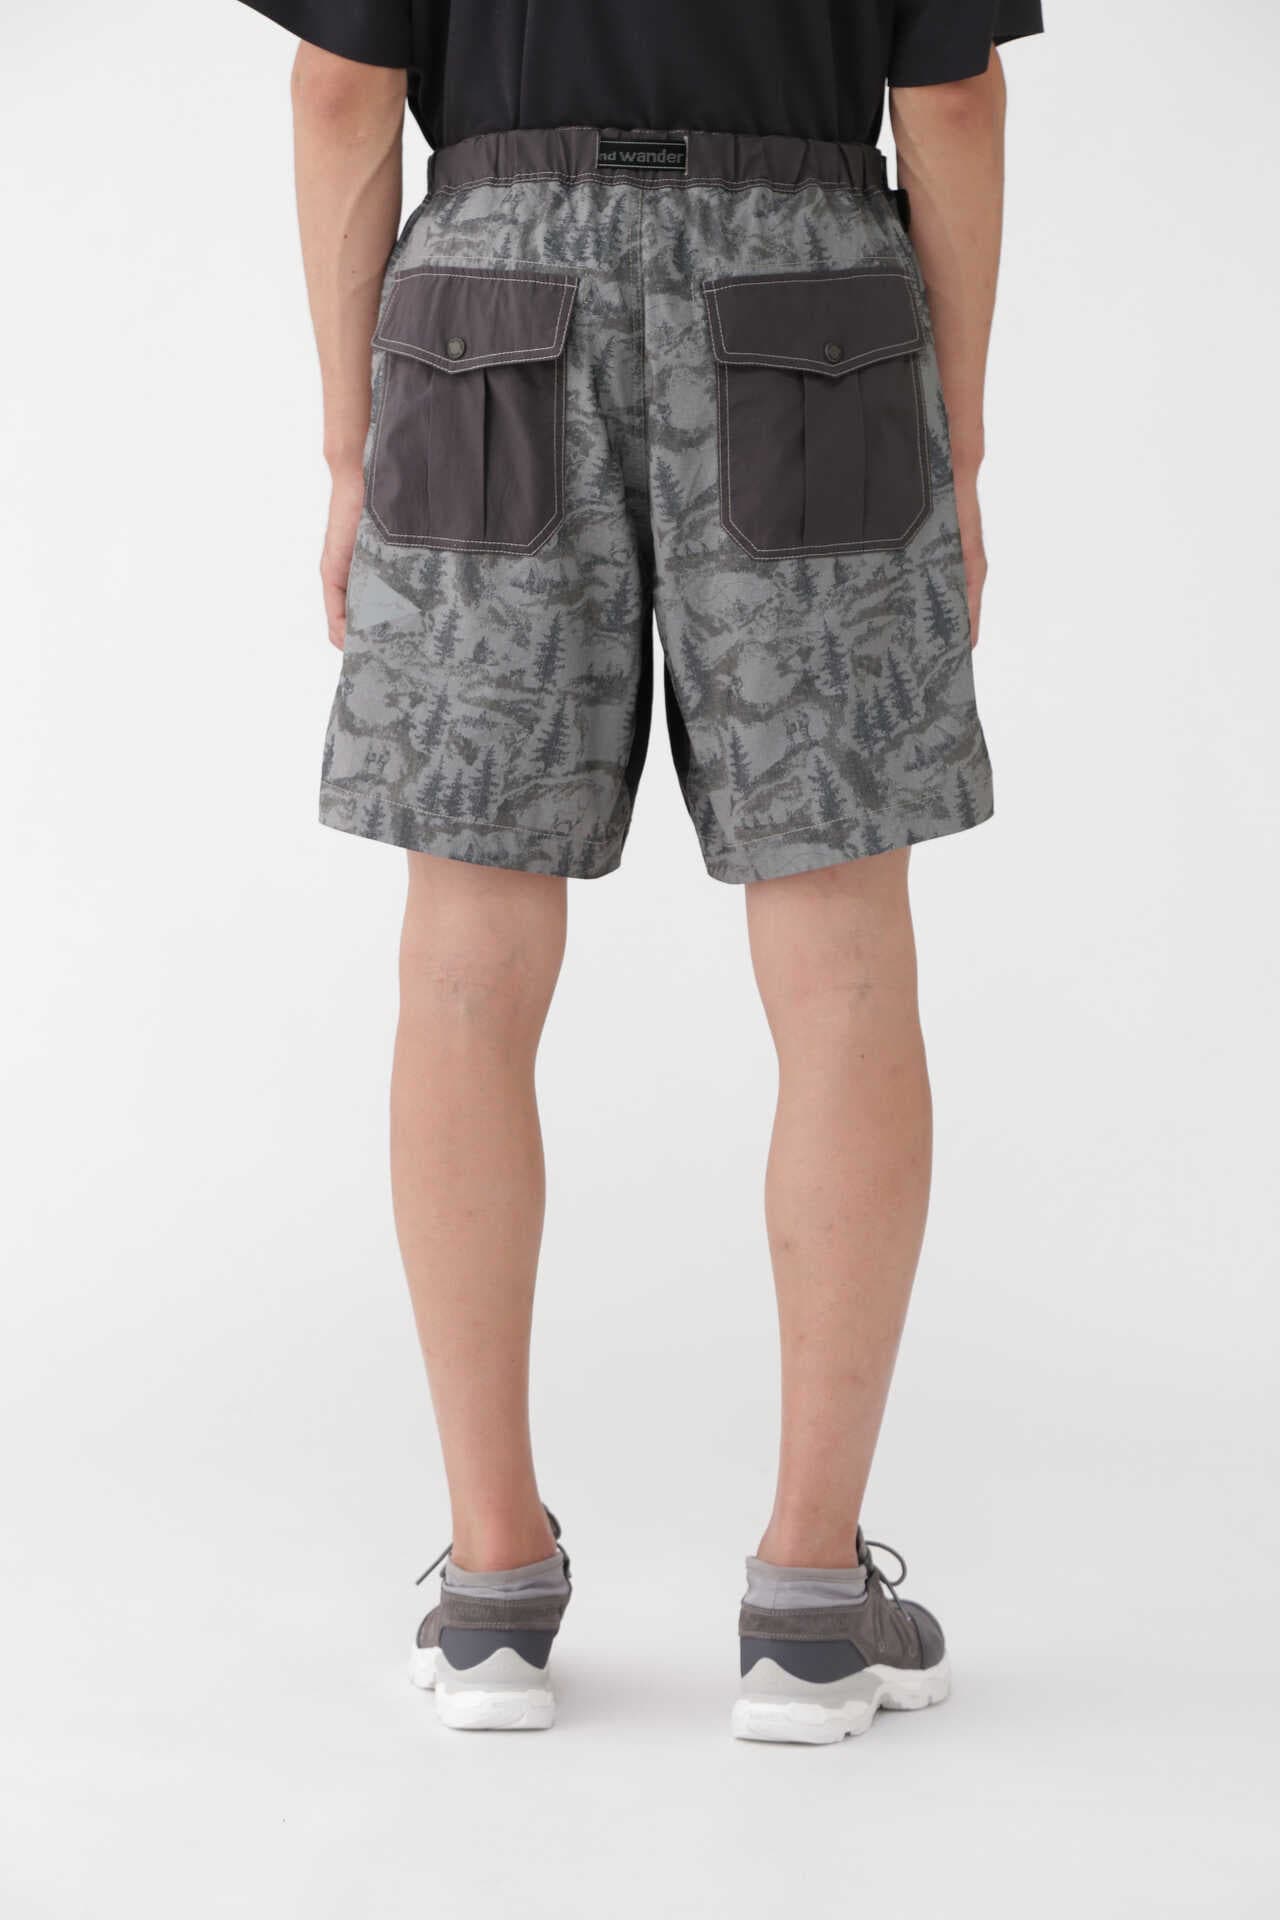 in the Mountain printed short pants